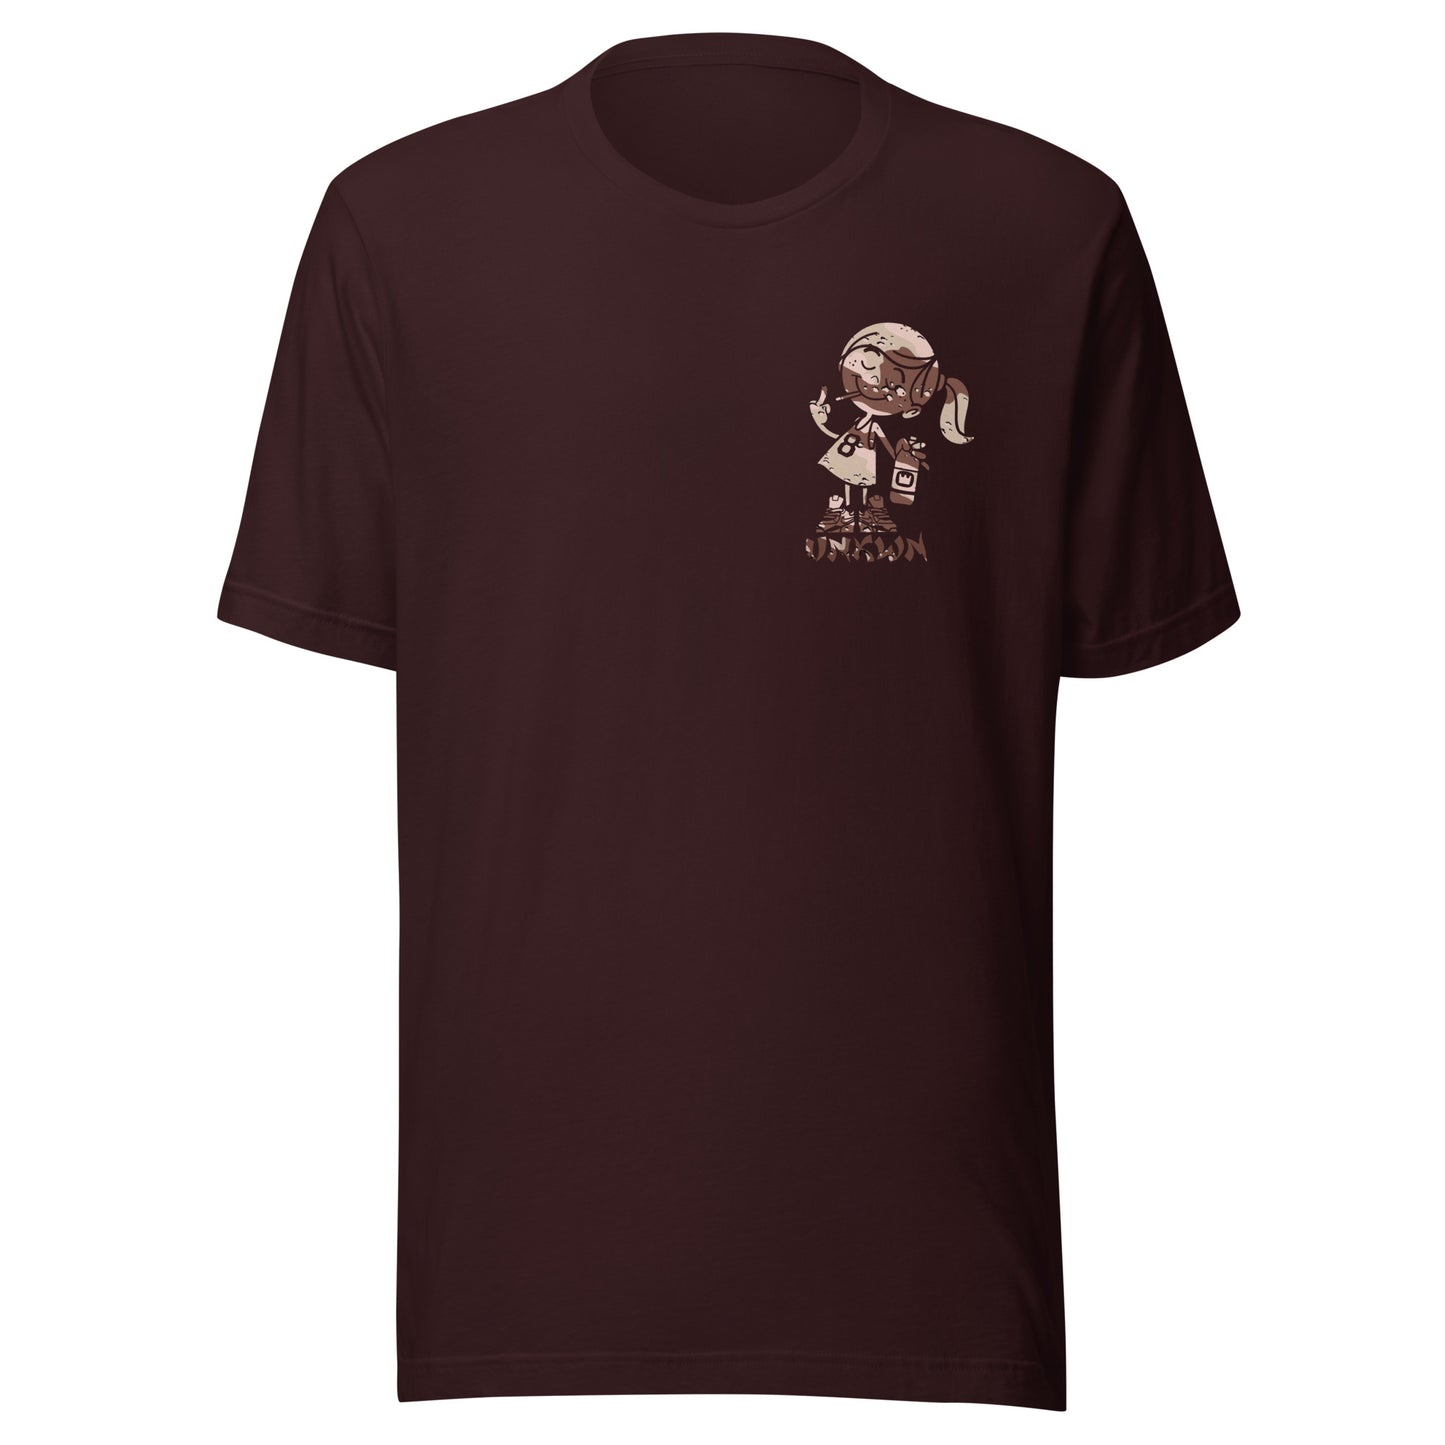 Wild'n out T-shirt - chocolate chip